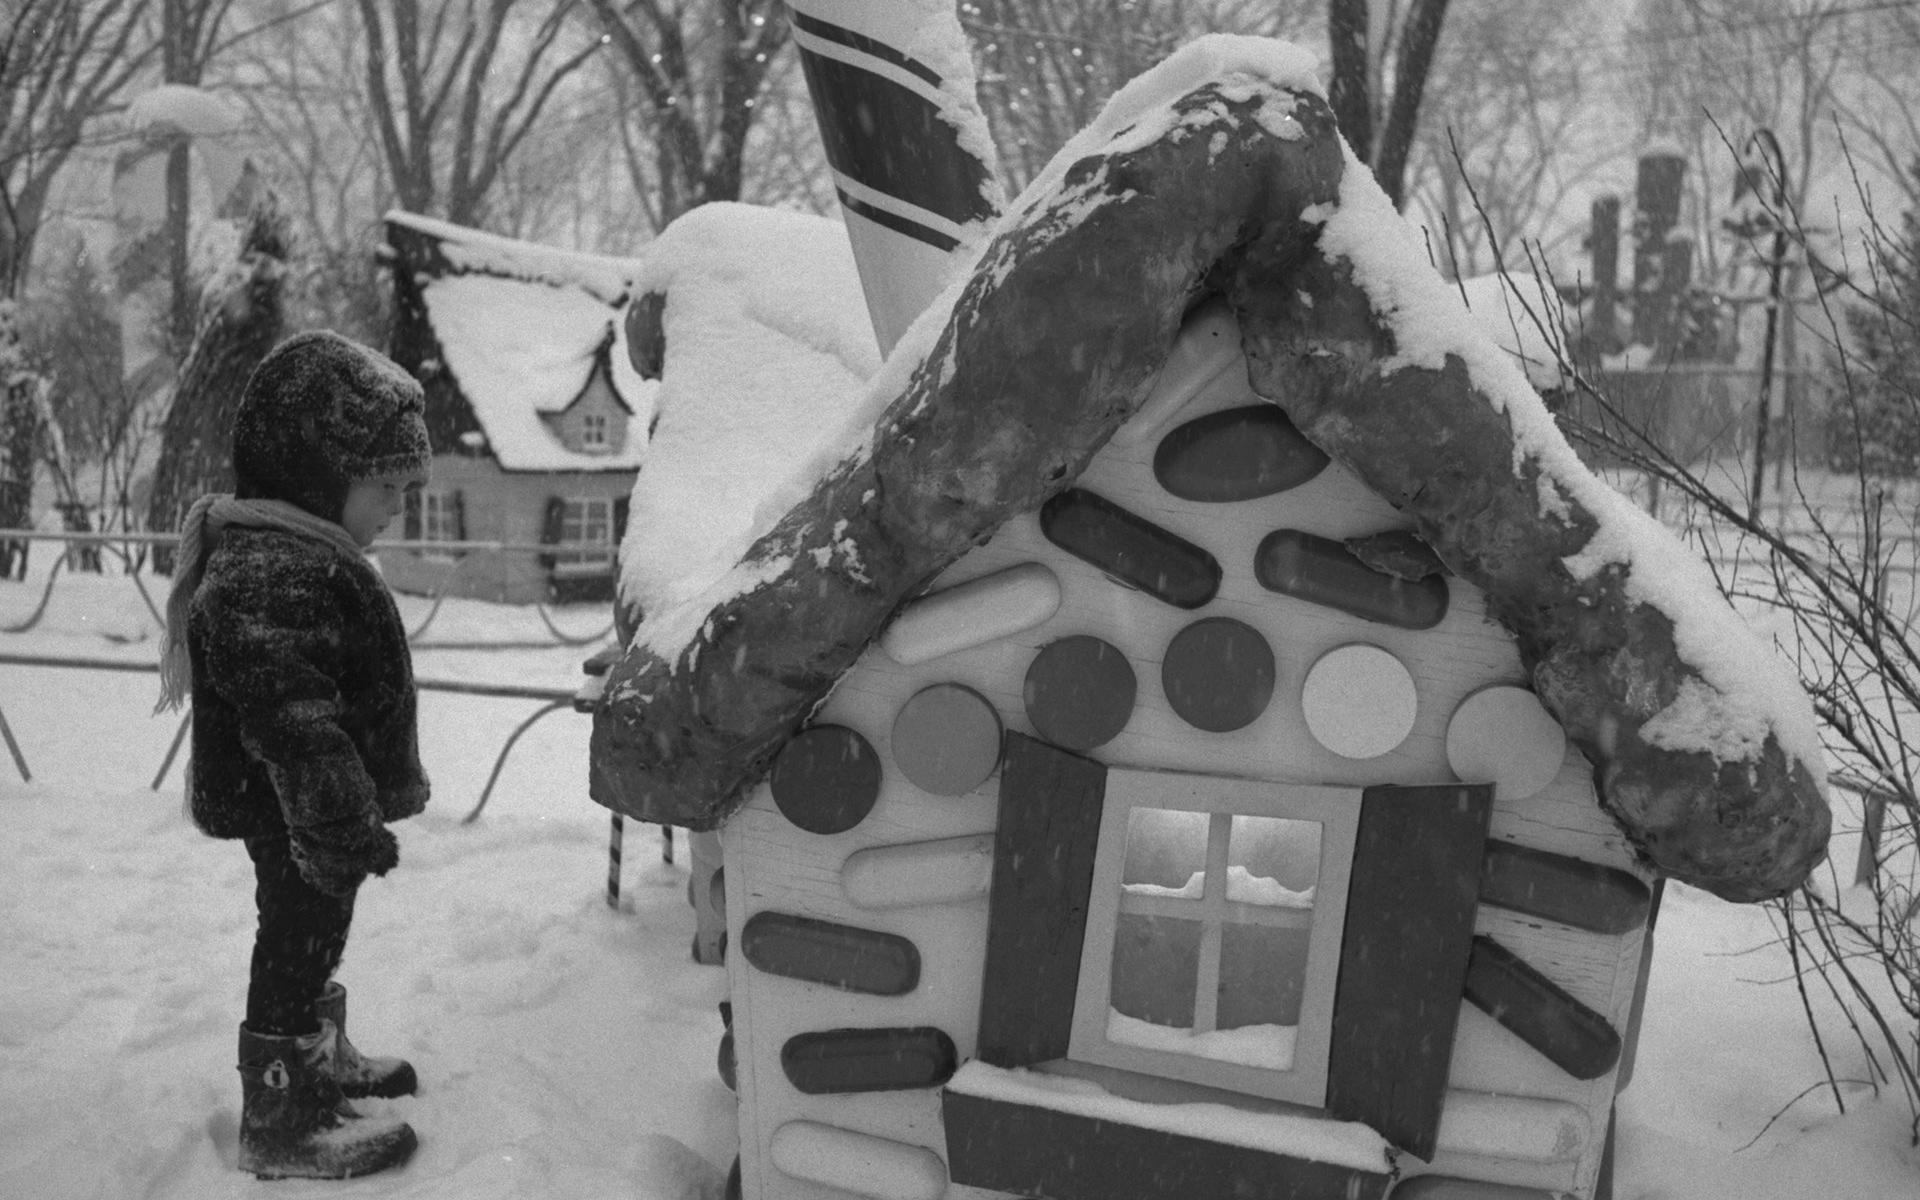 Small child in winter clothing looking at a candy-cane cottage